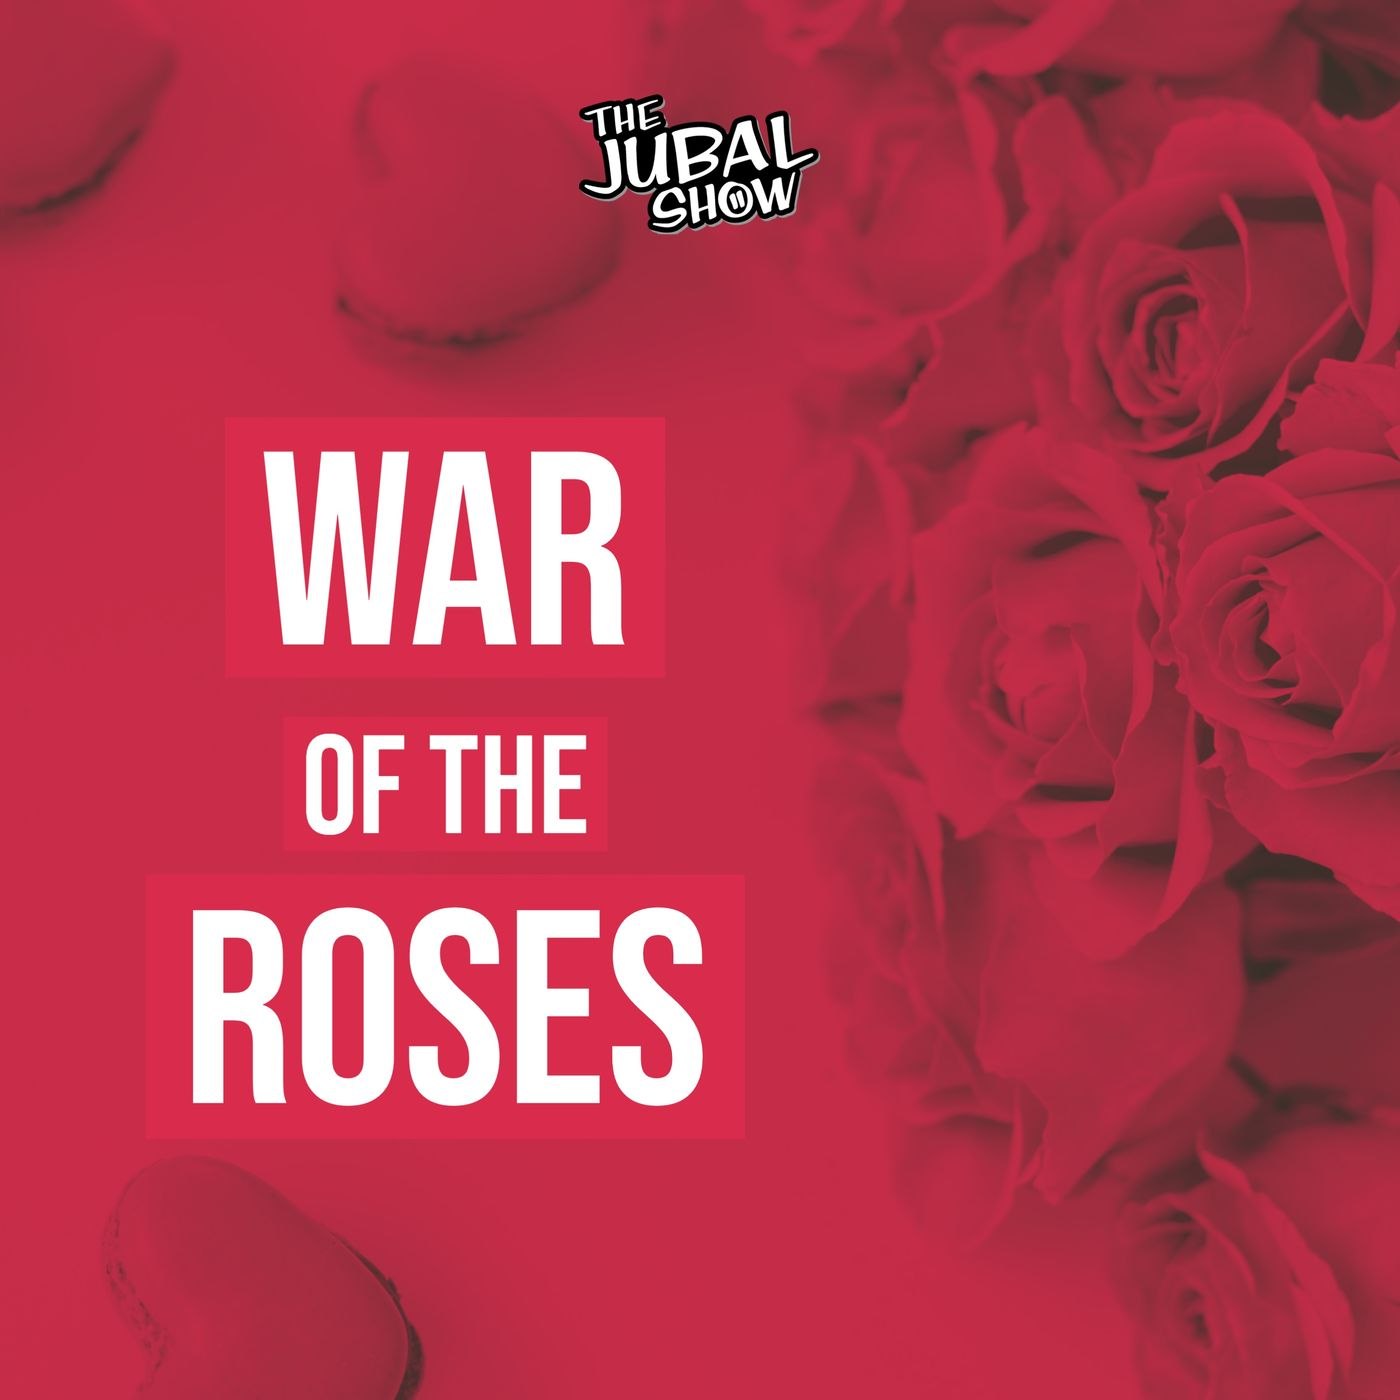 Tara thinks her girlfirend's cheating in this War of the Roses!